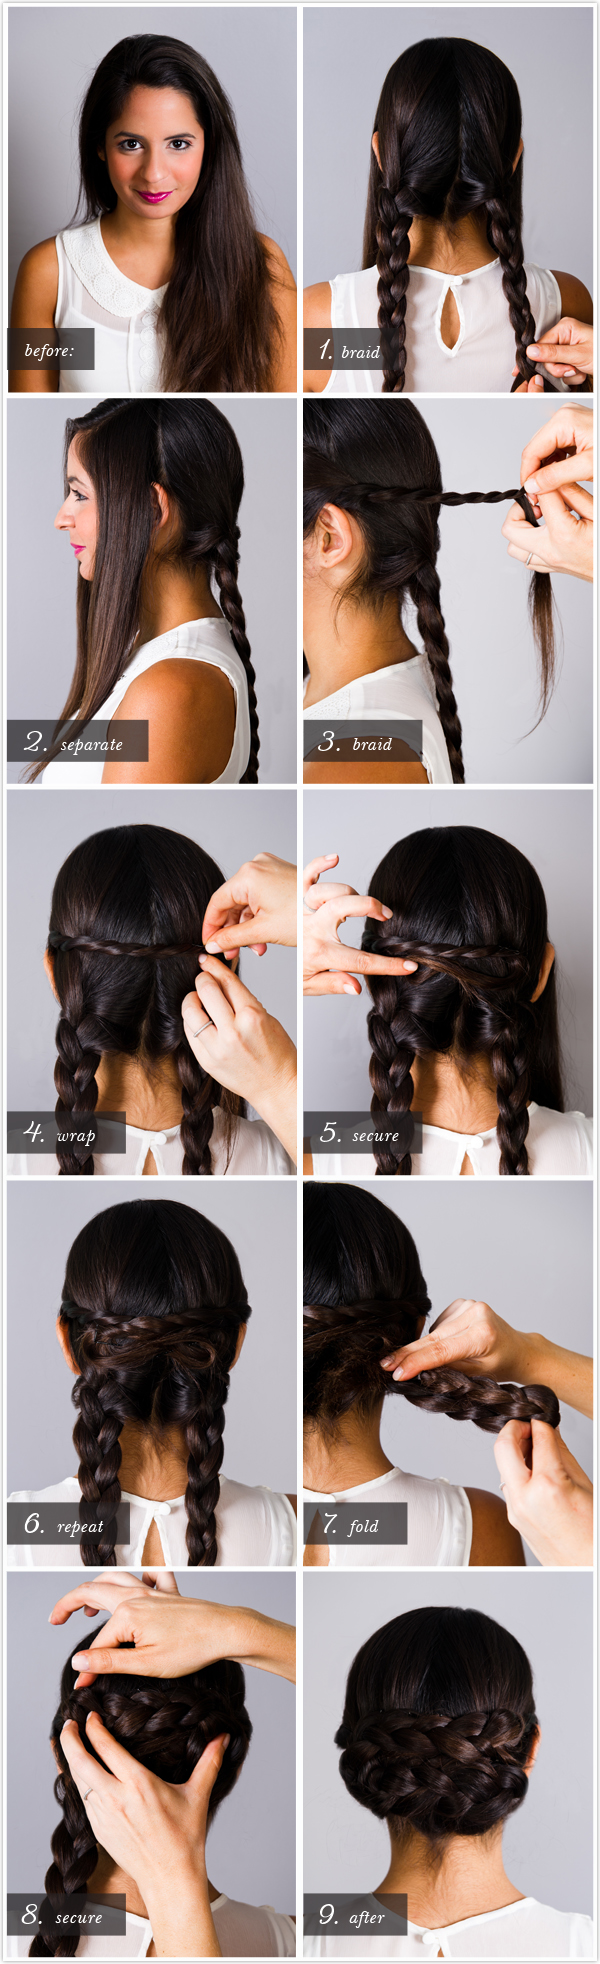 hairstyle8